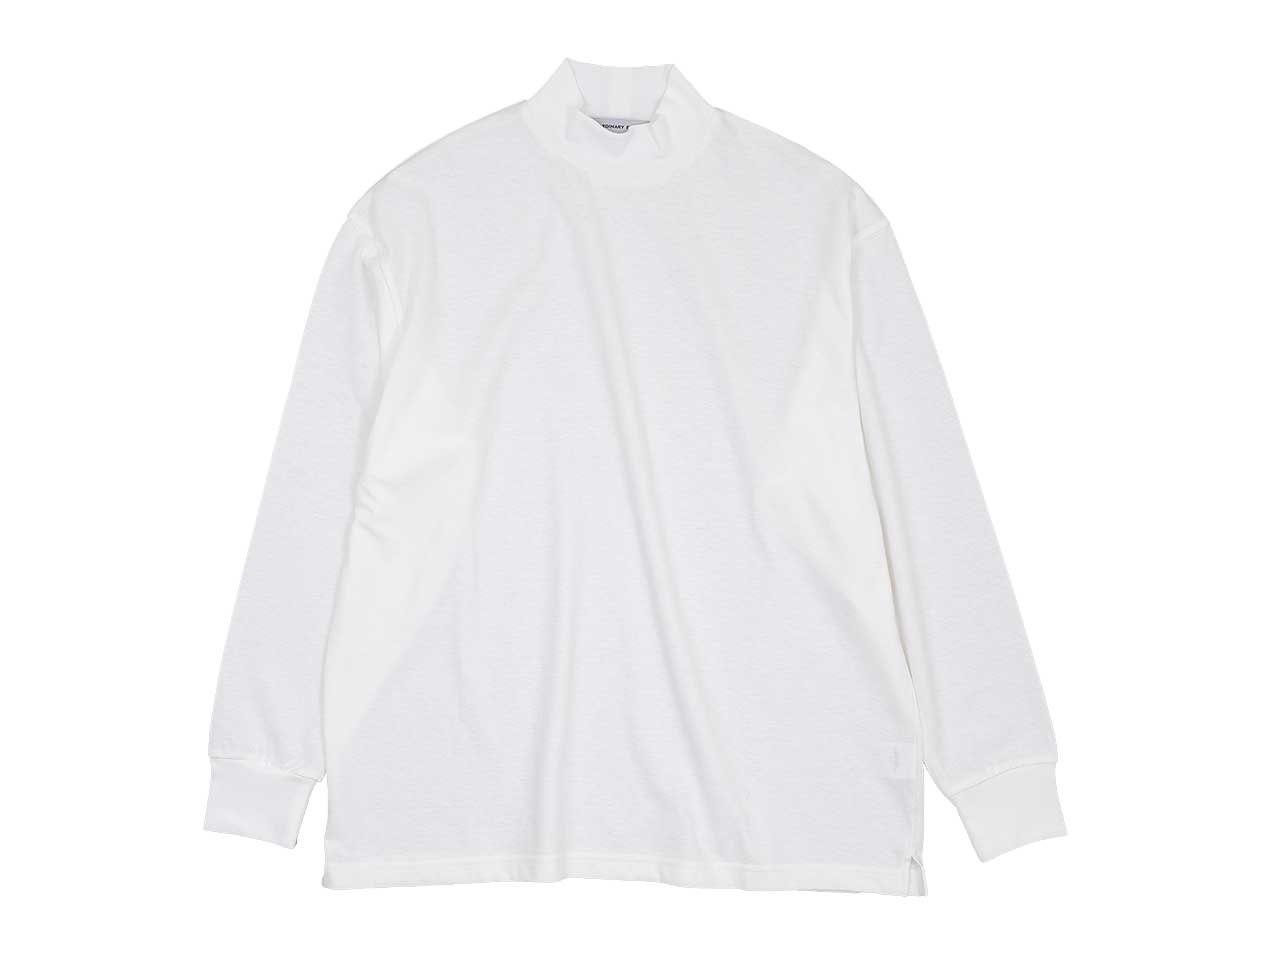 ordinary fits MOCK NECK PULLOVER OFF WHITE